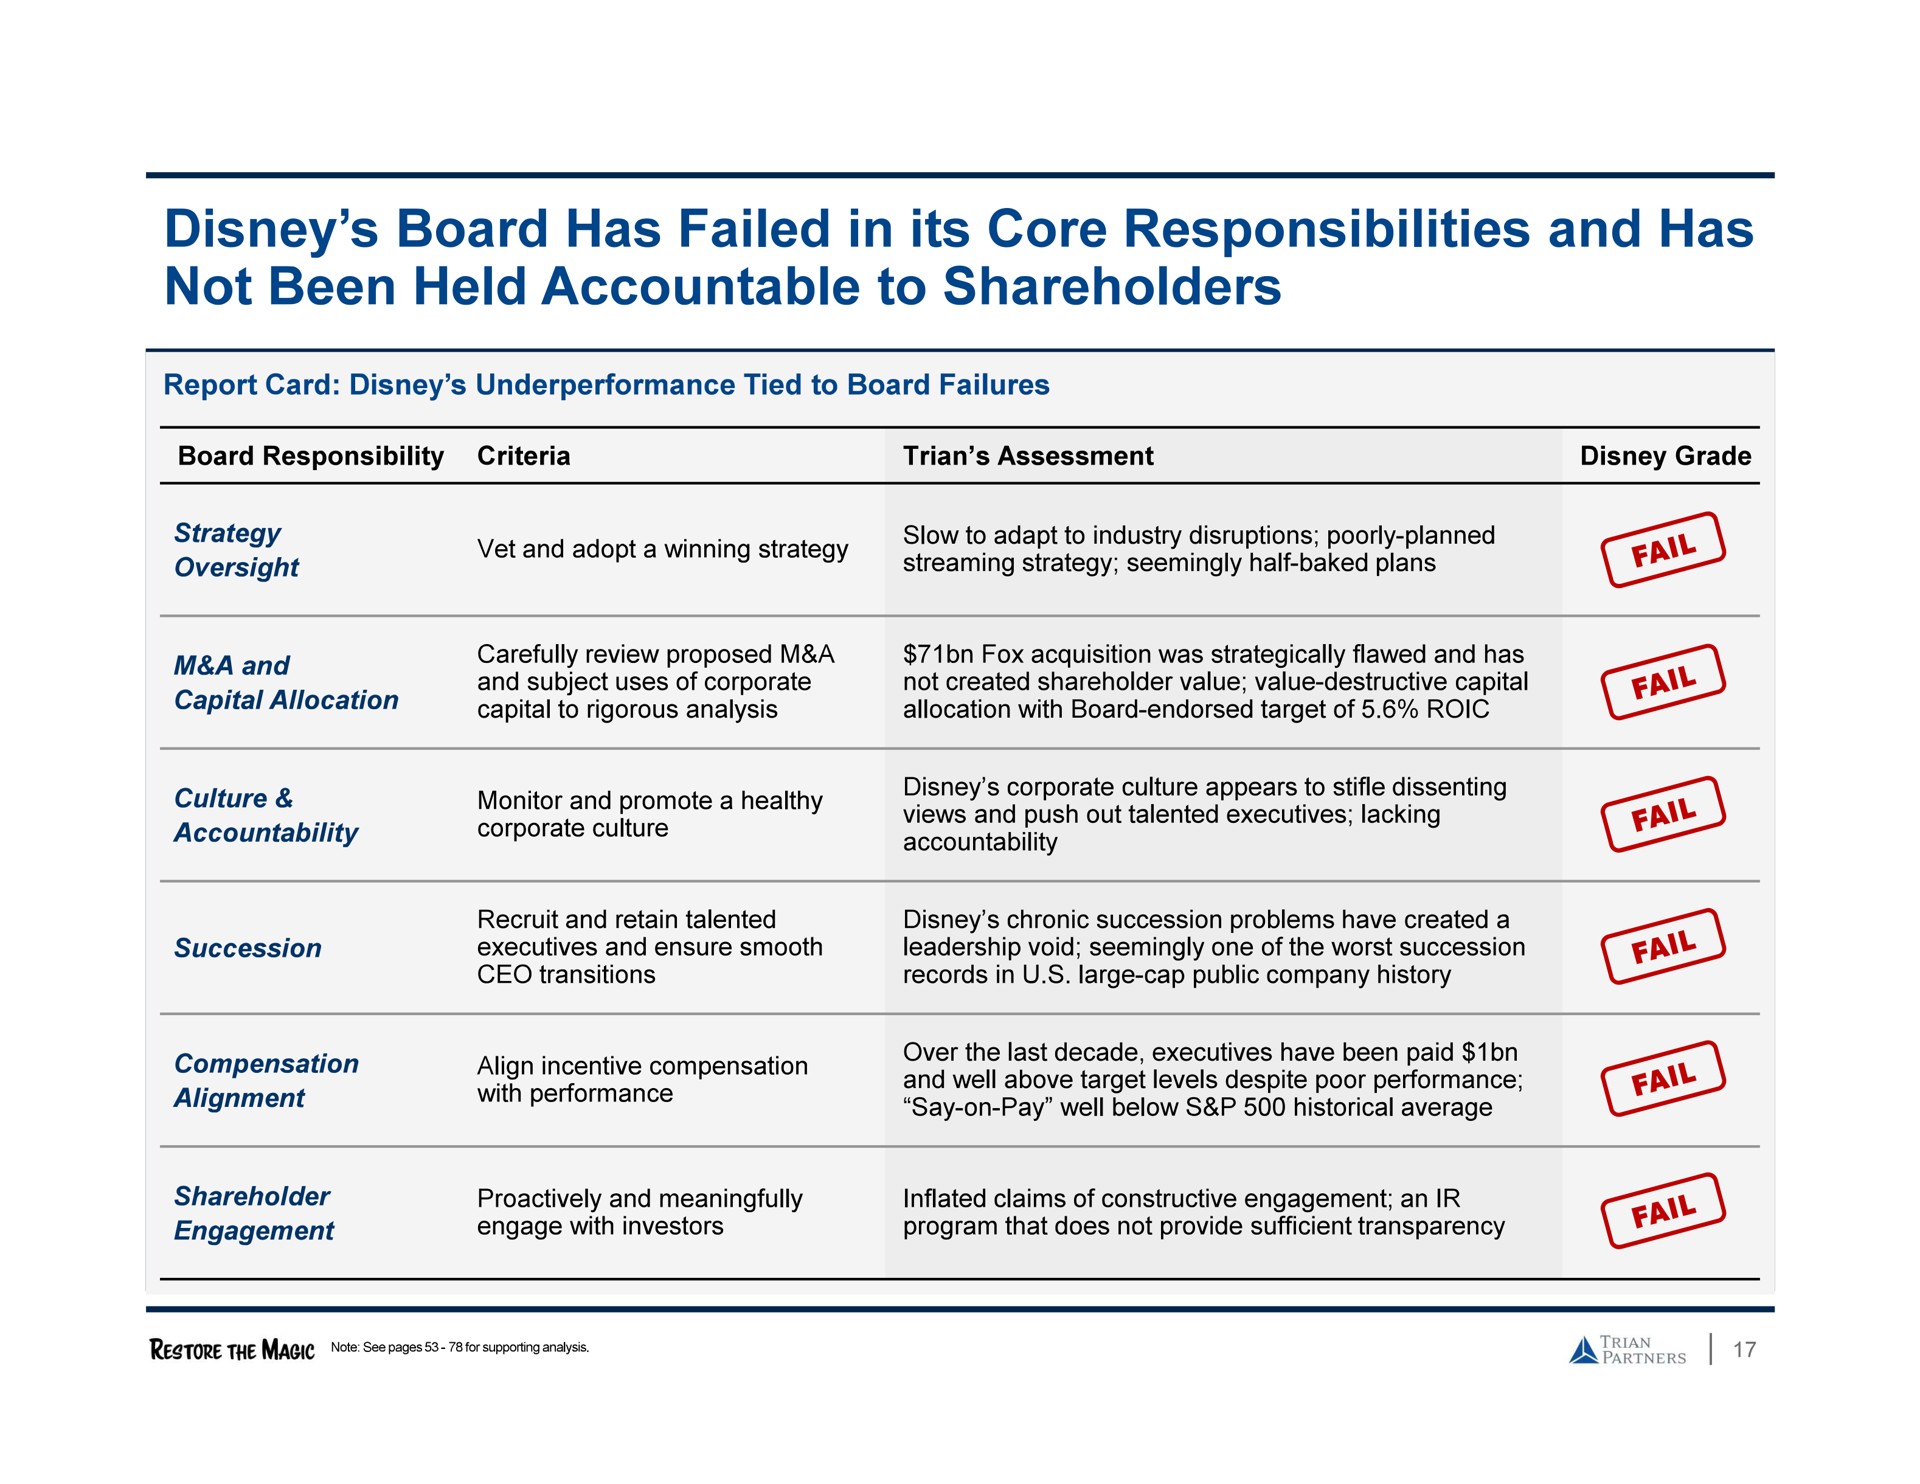 board has failed in its core responsibilities and has not been held accountable to shareholders | Trian Partners